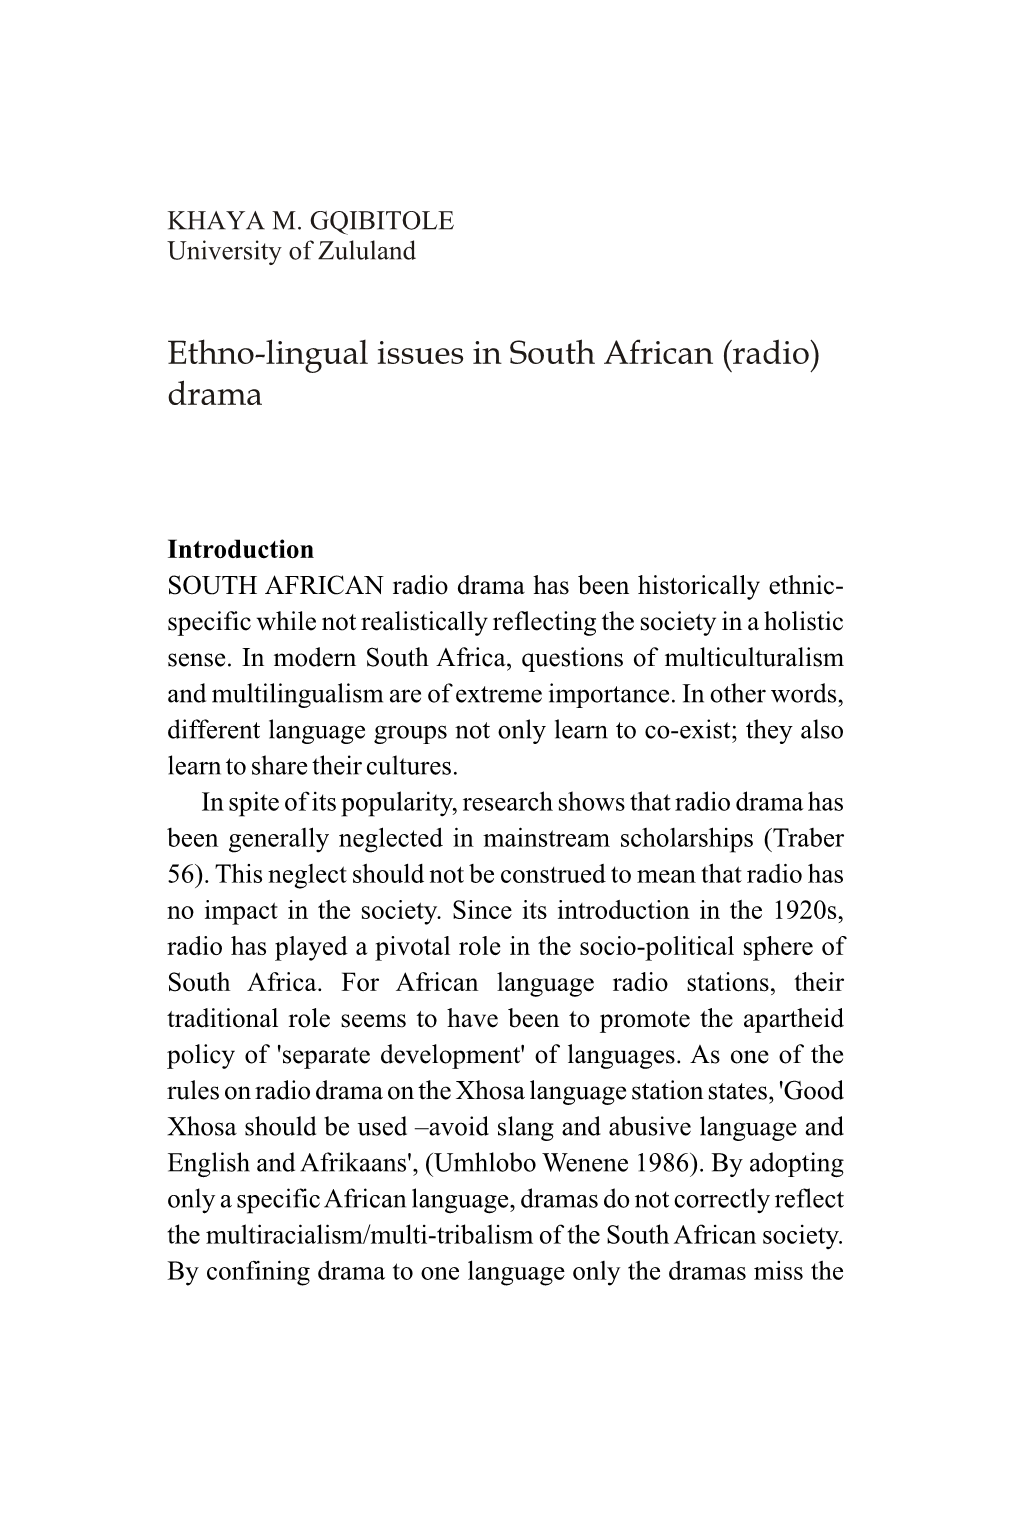 Ethno-Lingual Issues in South African (Radio) Drama